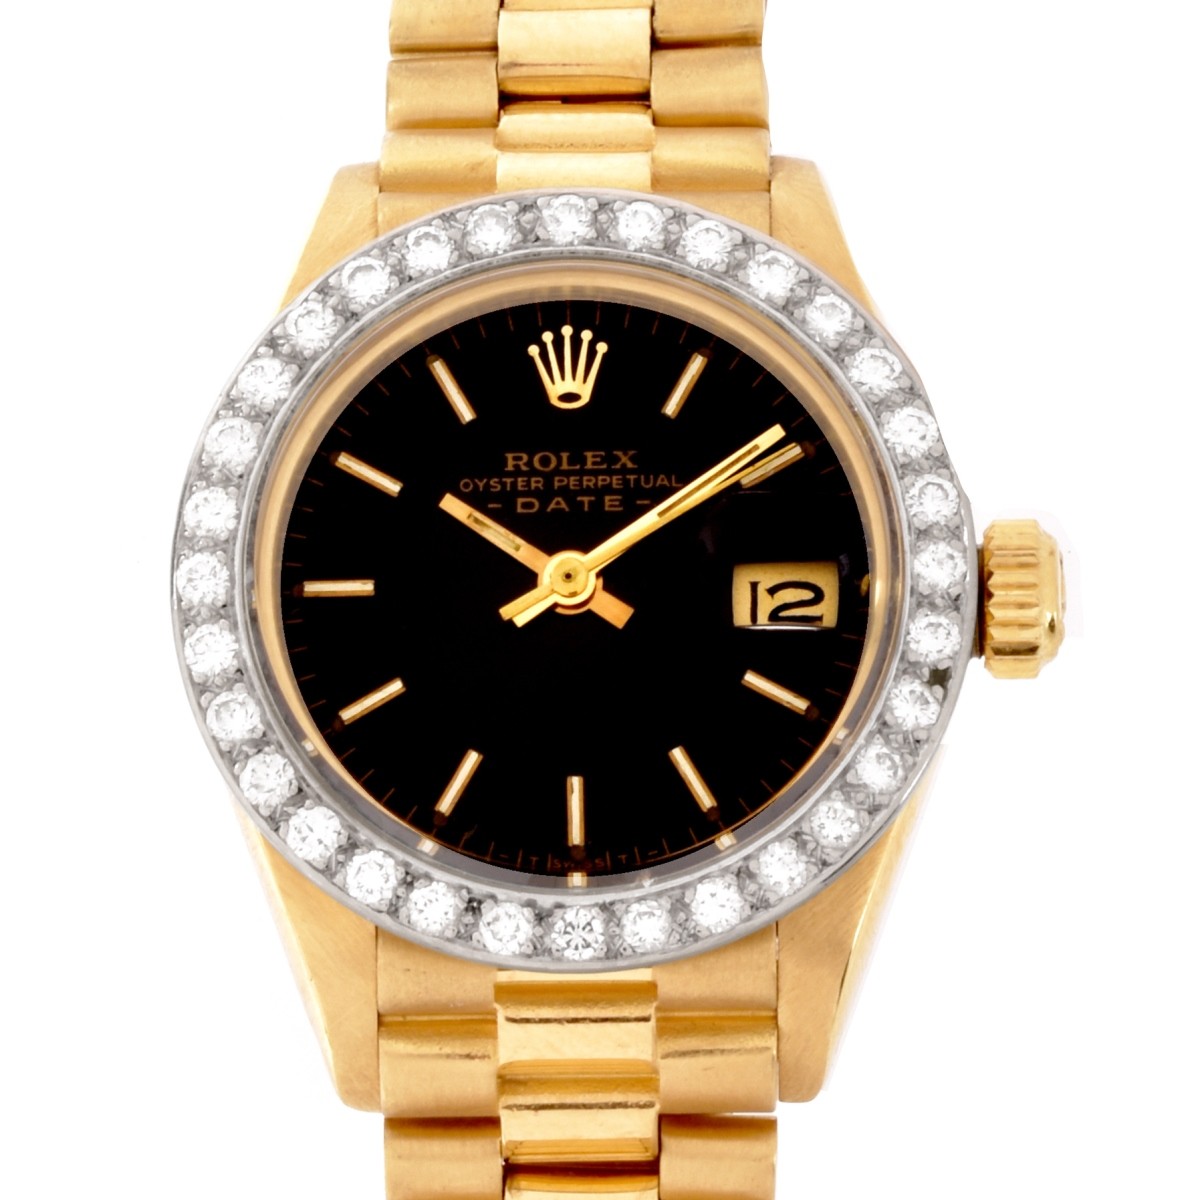 Lady's Rolex 18K Oyster Perpetual Date